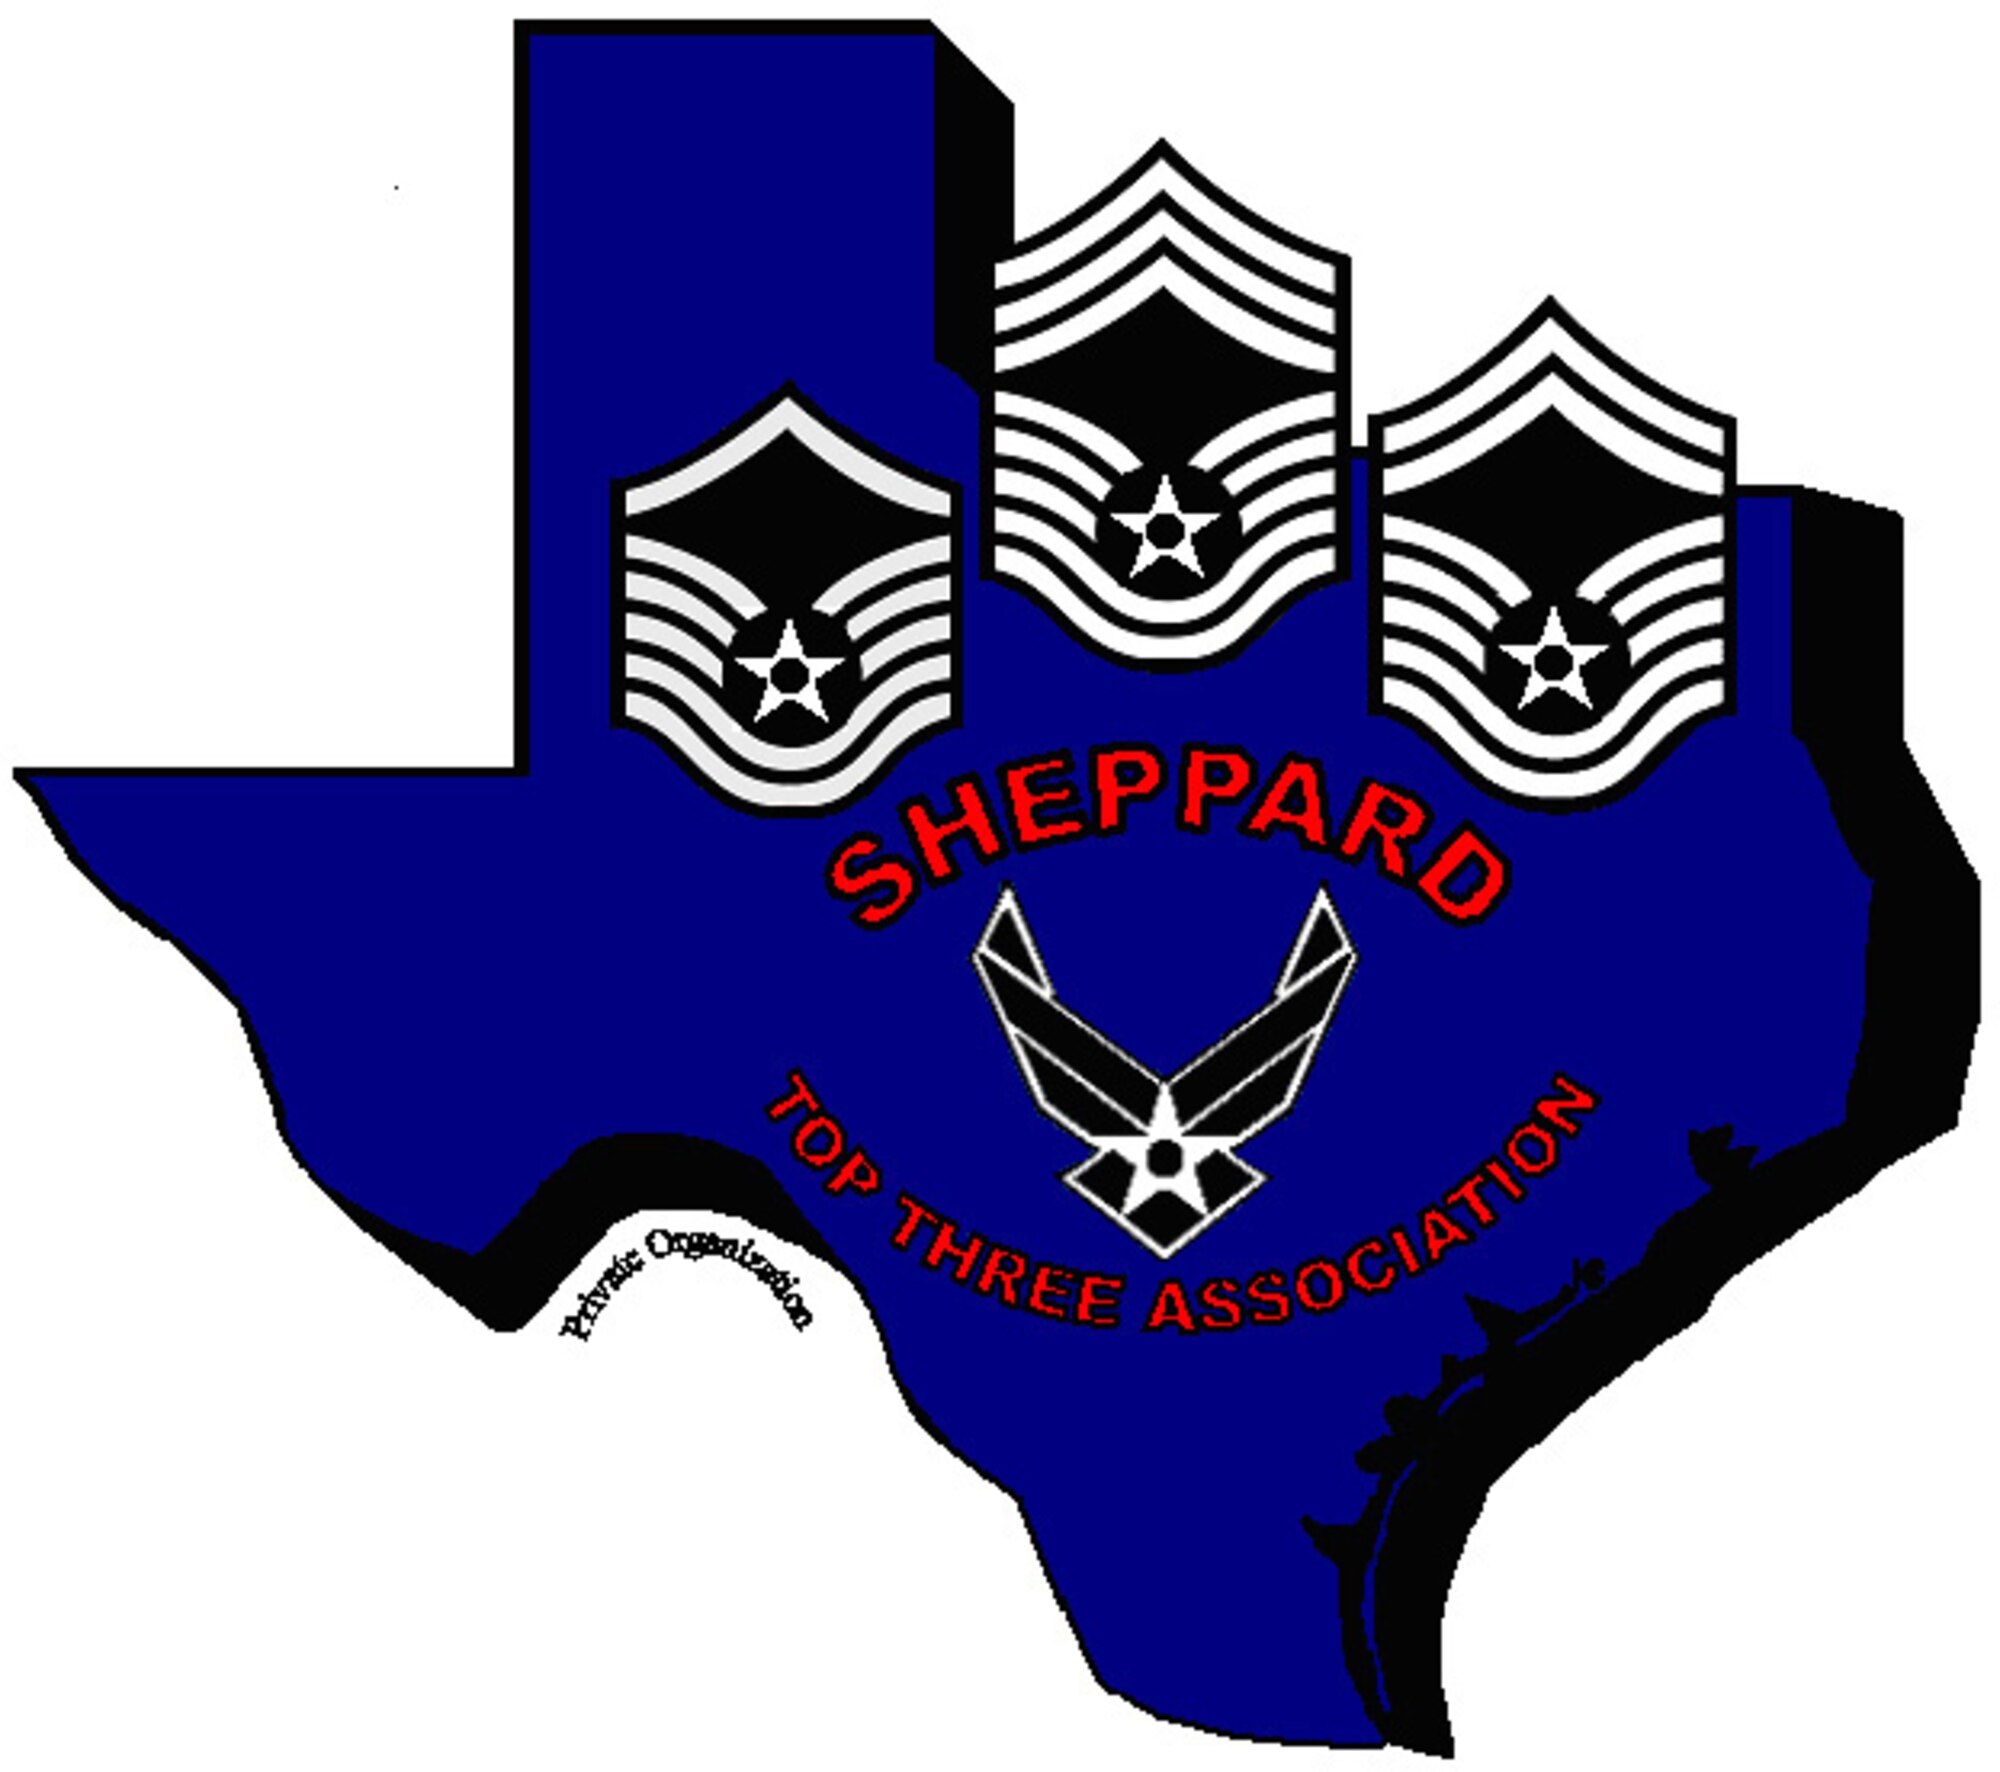 The Sheppard Top 3 organizes a variety of programs and events.  Its main focus is helping junior NCOs and Airmen become aware of their responsbilities, options and potential.